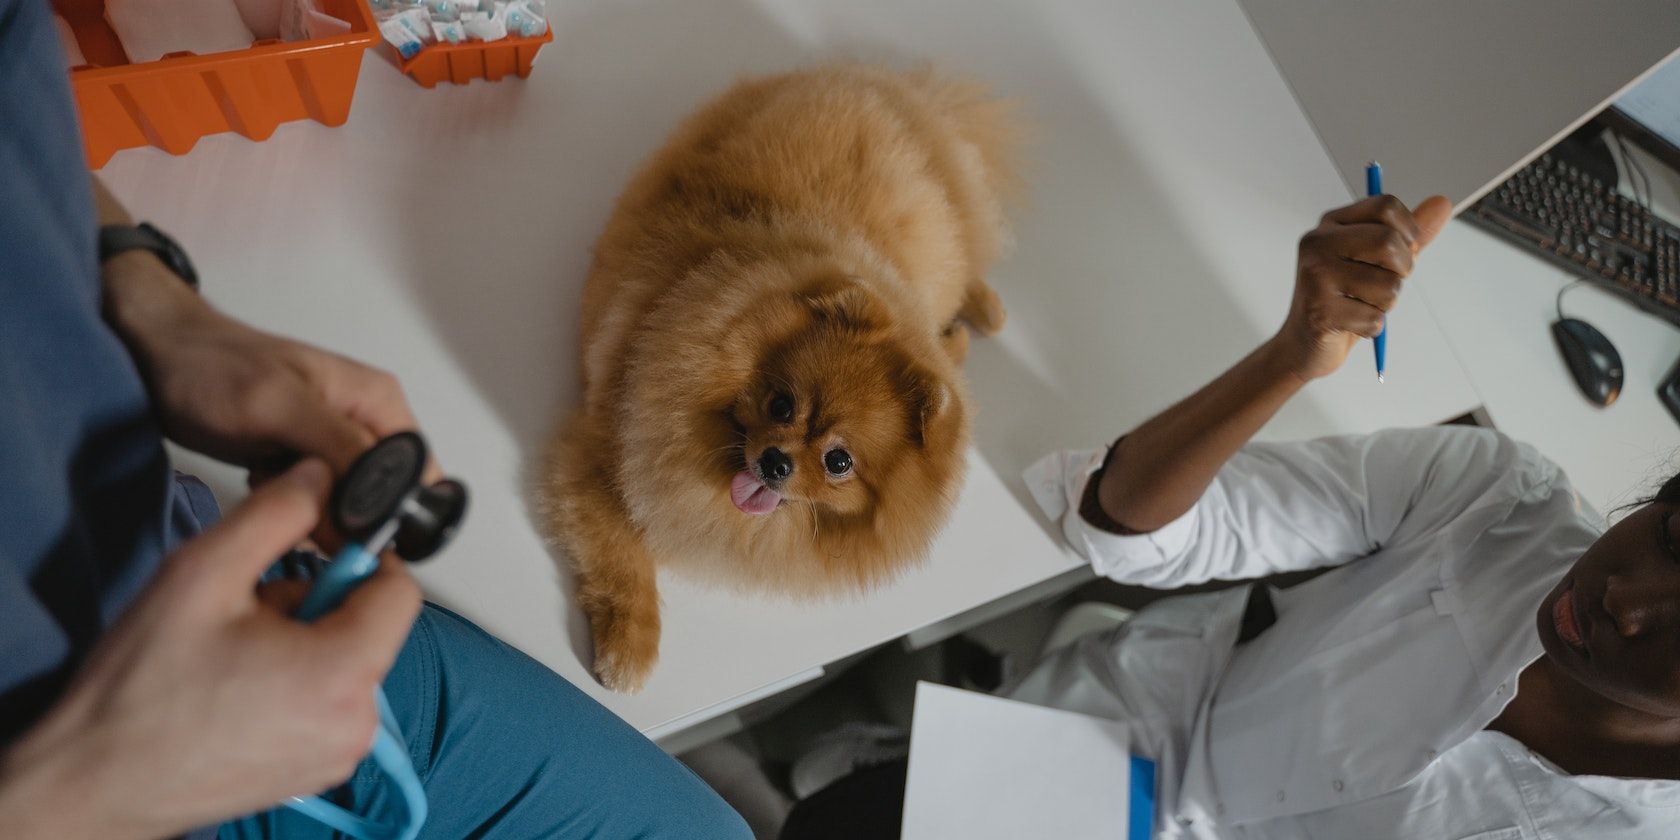 A Pomeranian over the Diagnostic Table Inside a Clinic